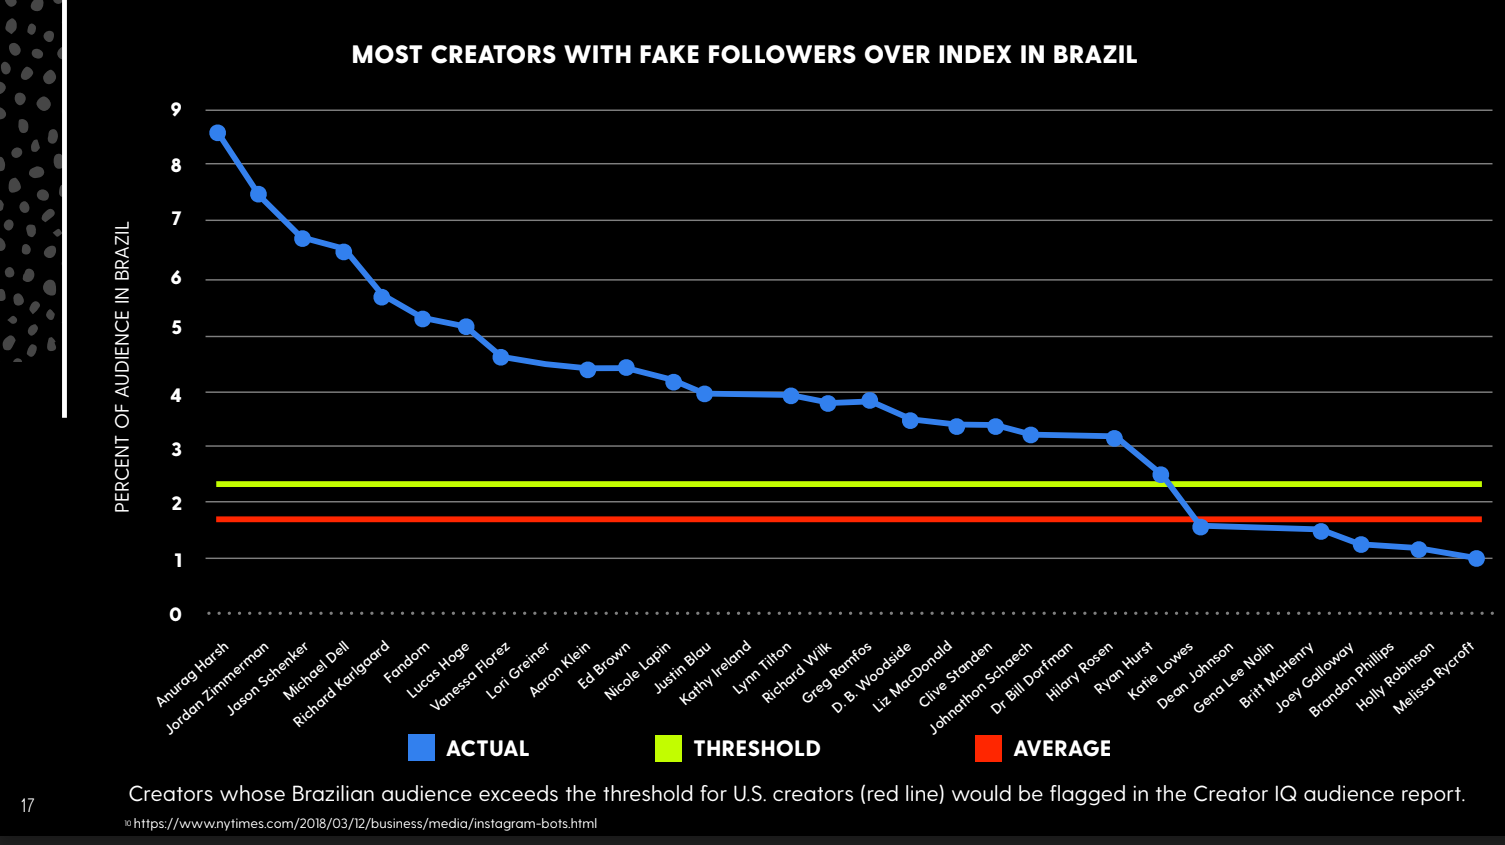 Most creators with fake followers over index in Brazil